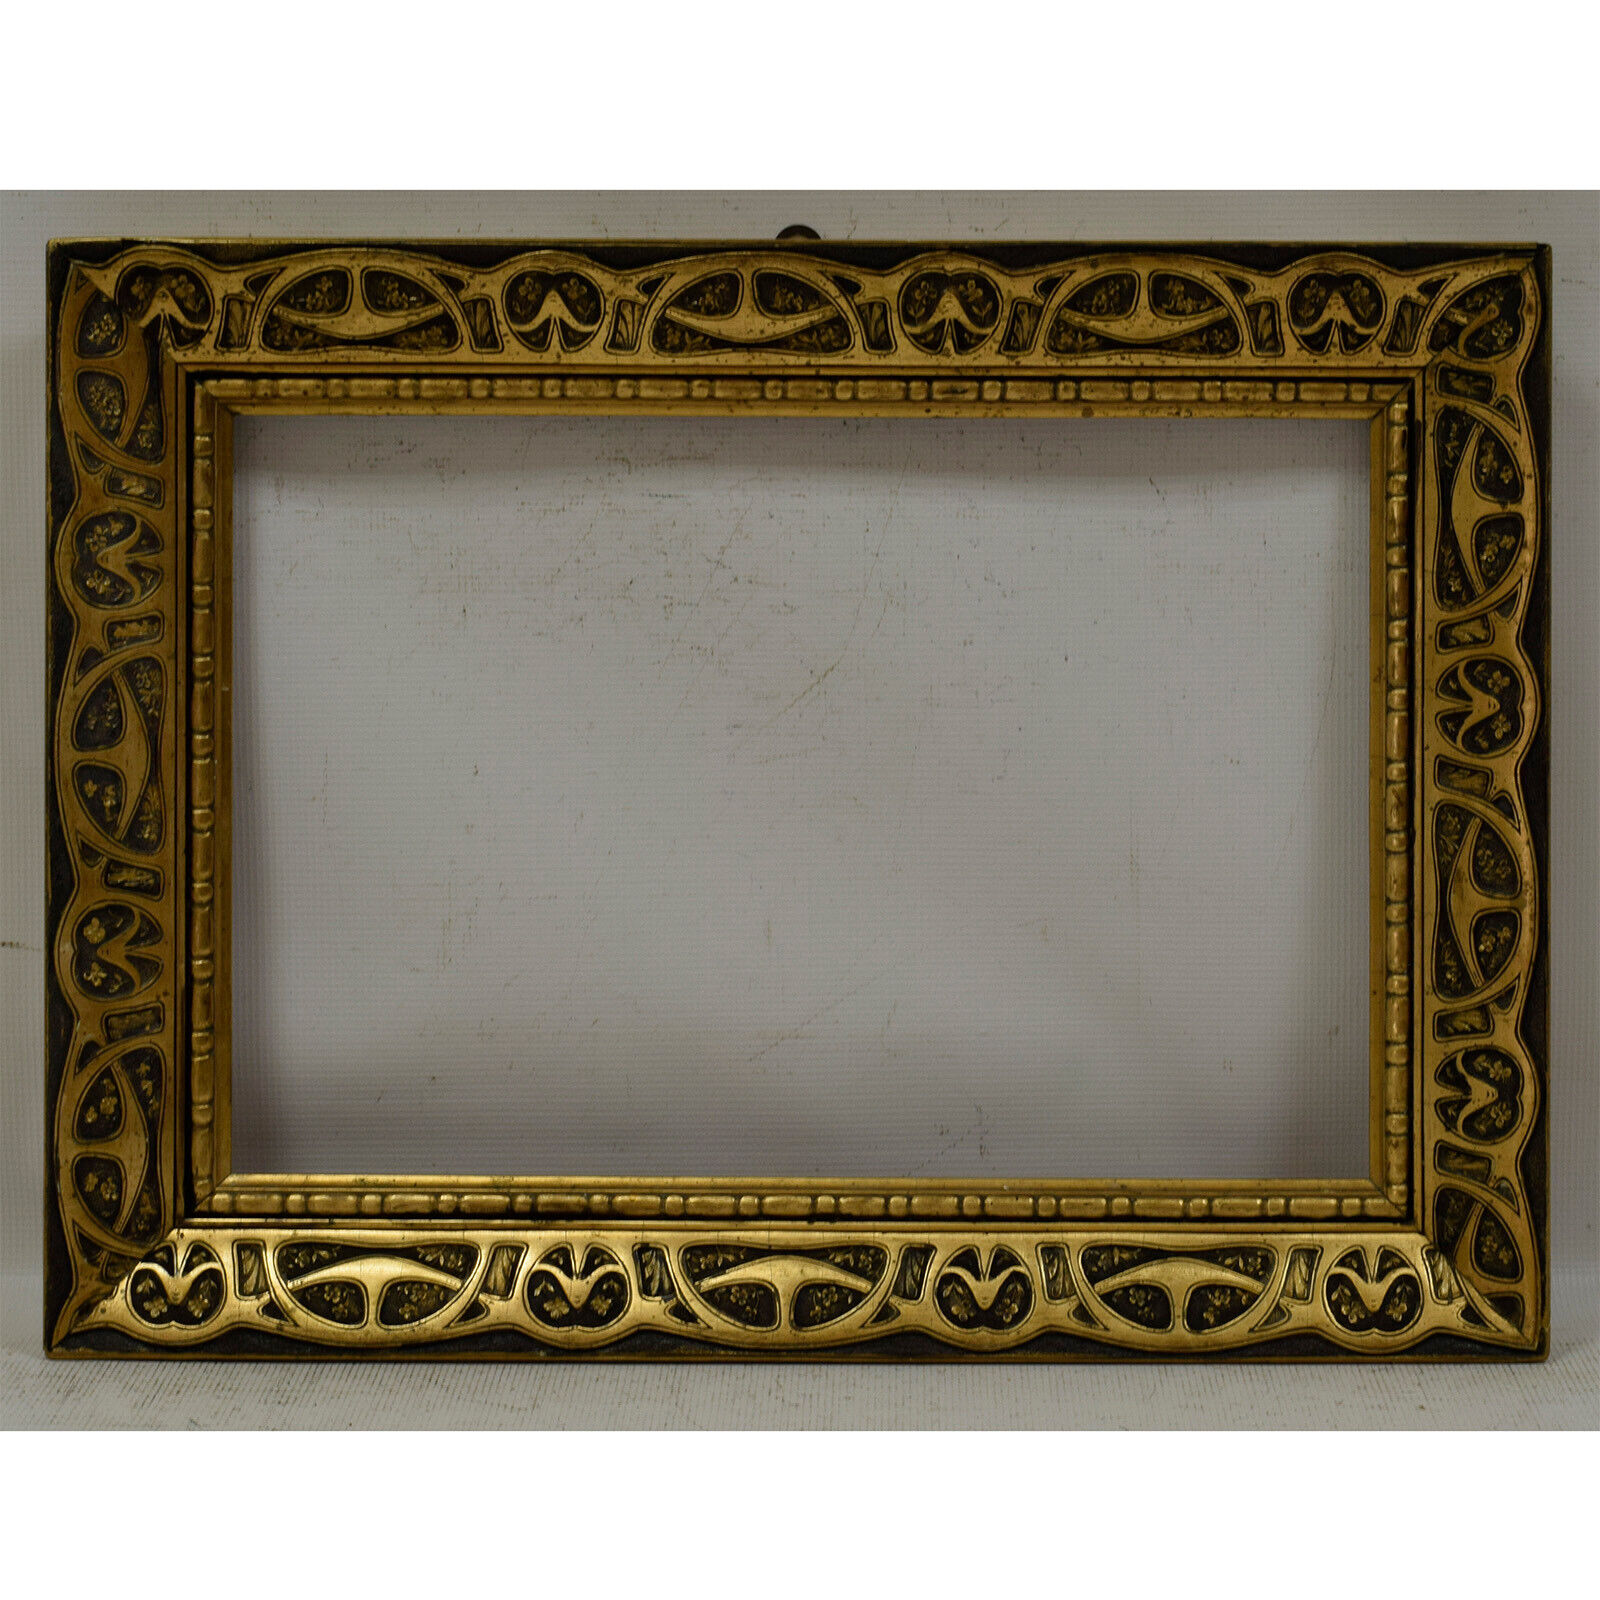 Ca 1900 Old wooden frame original condition Internal: 19,6x13,3 in